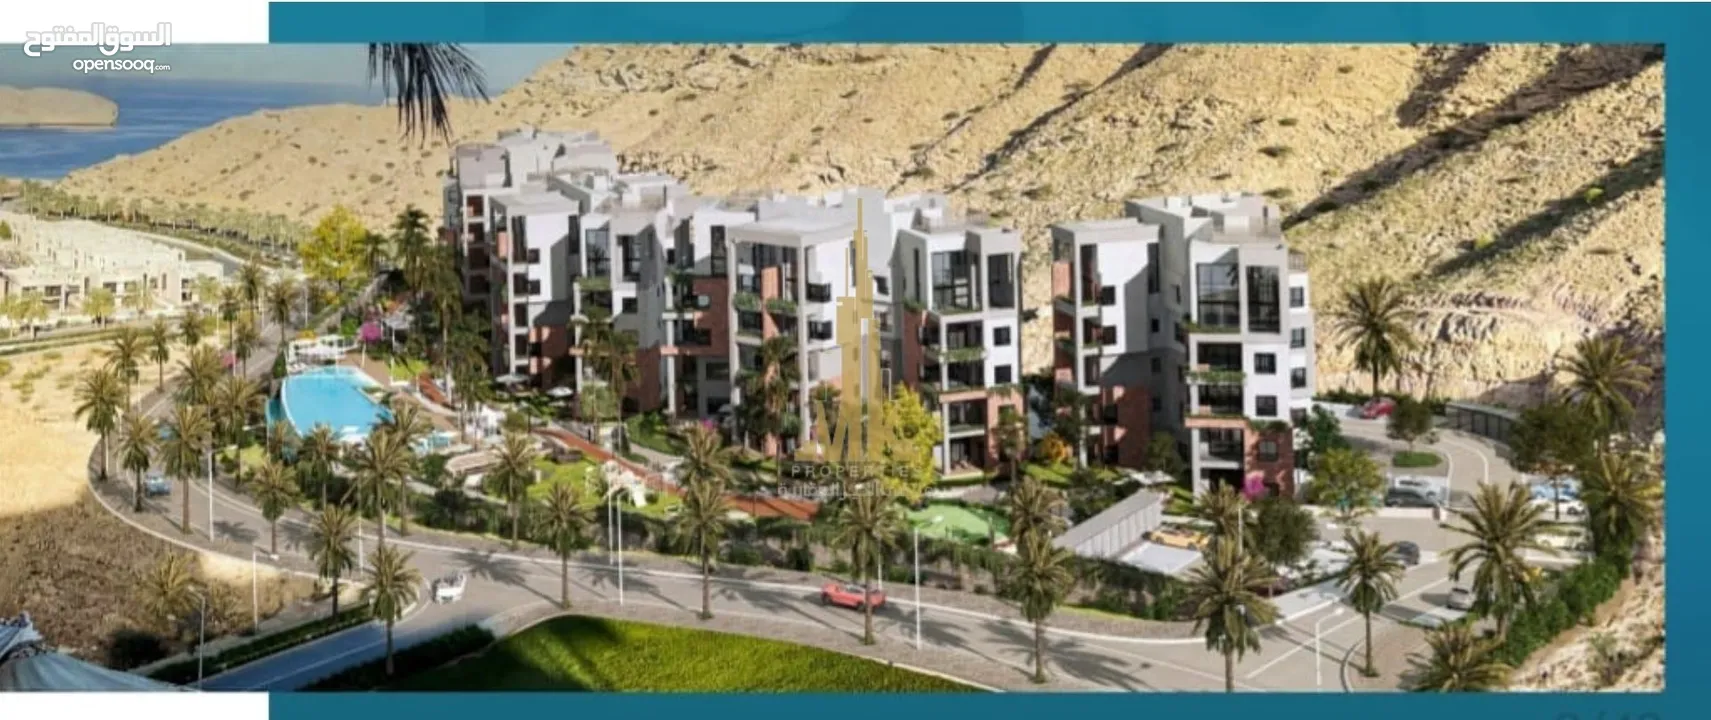 Studio apartment for sale in Muscat bay/ Freehold/ Lifetime residency